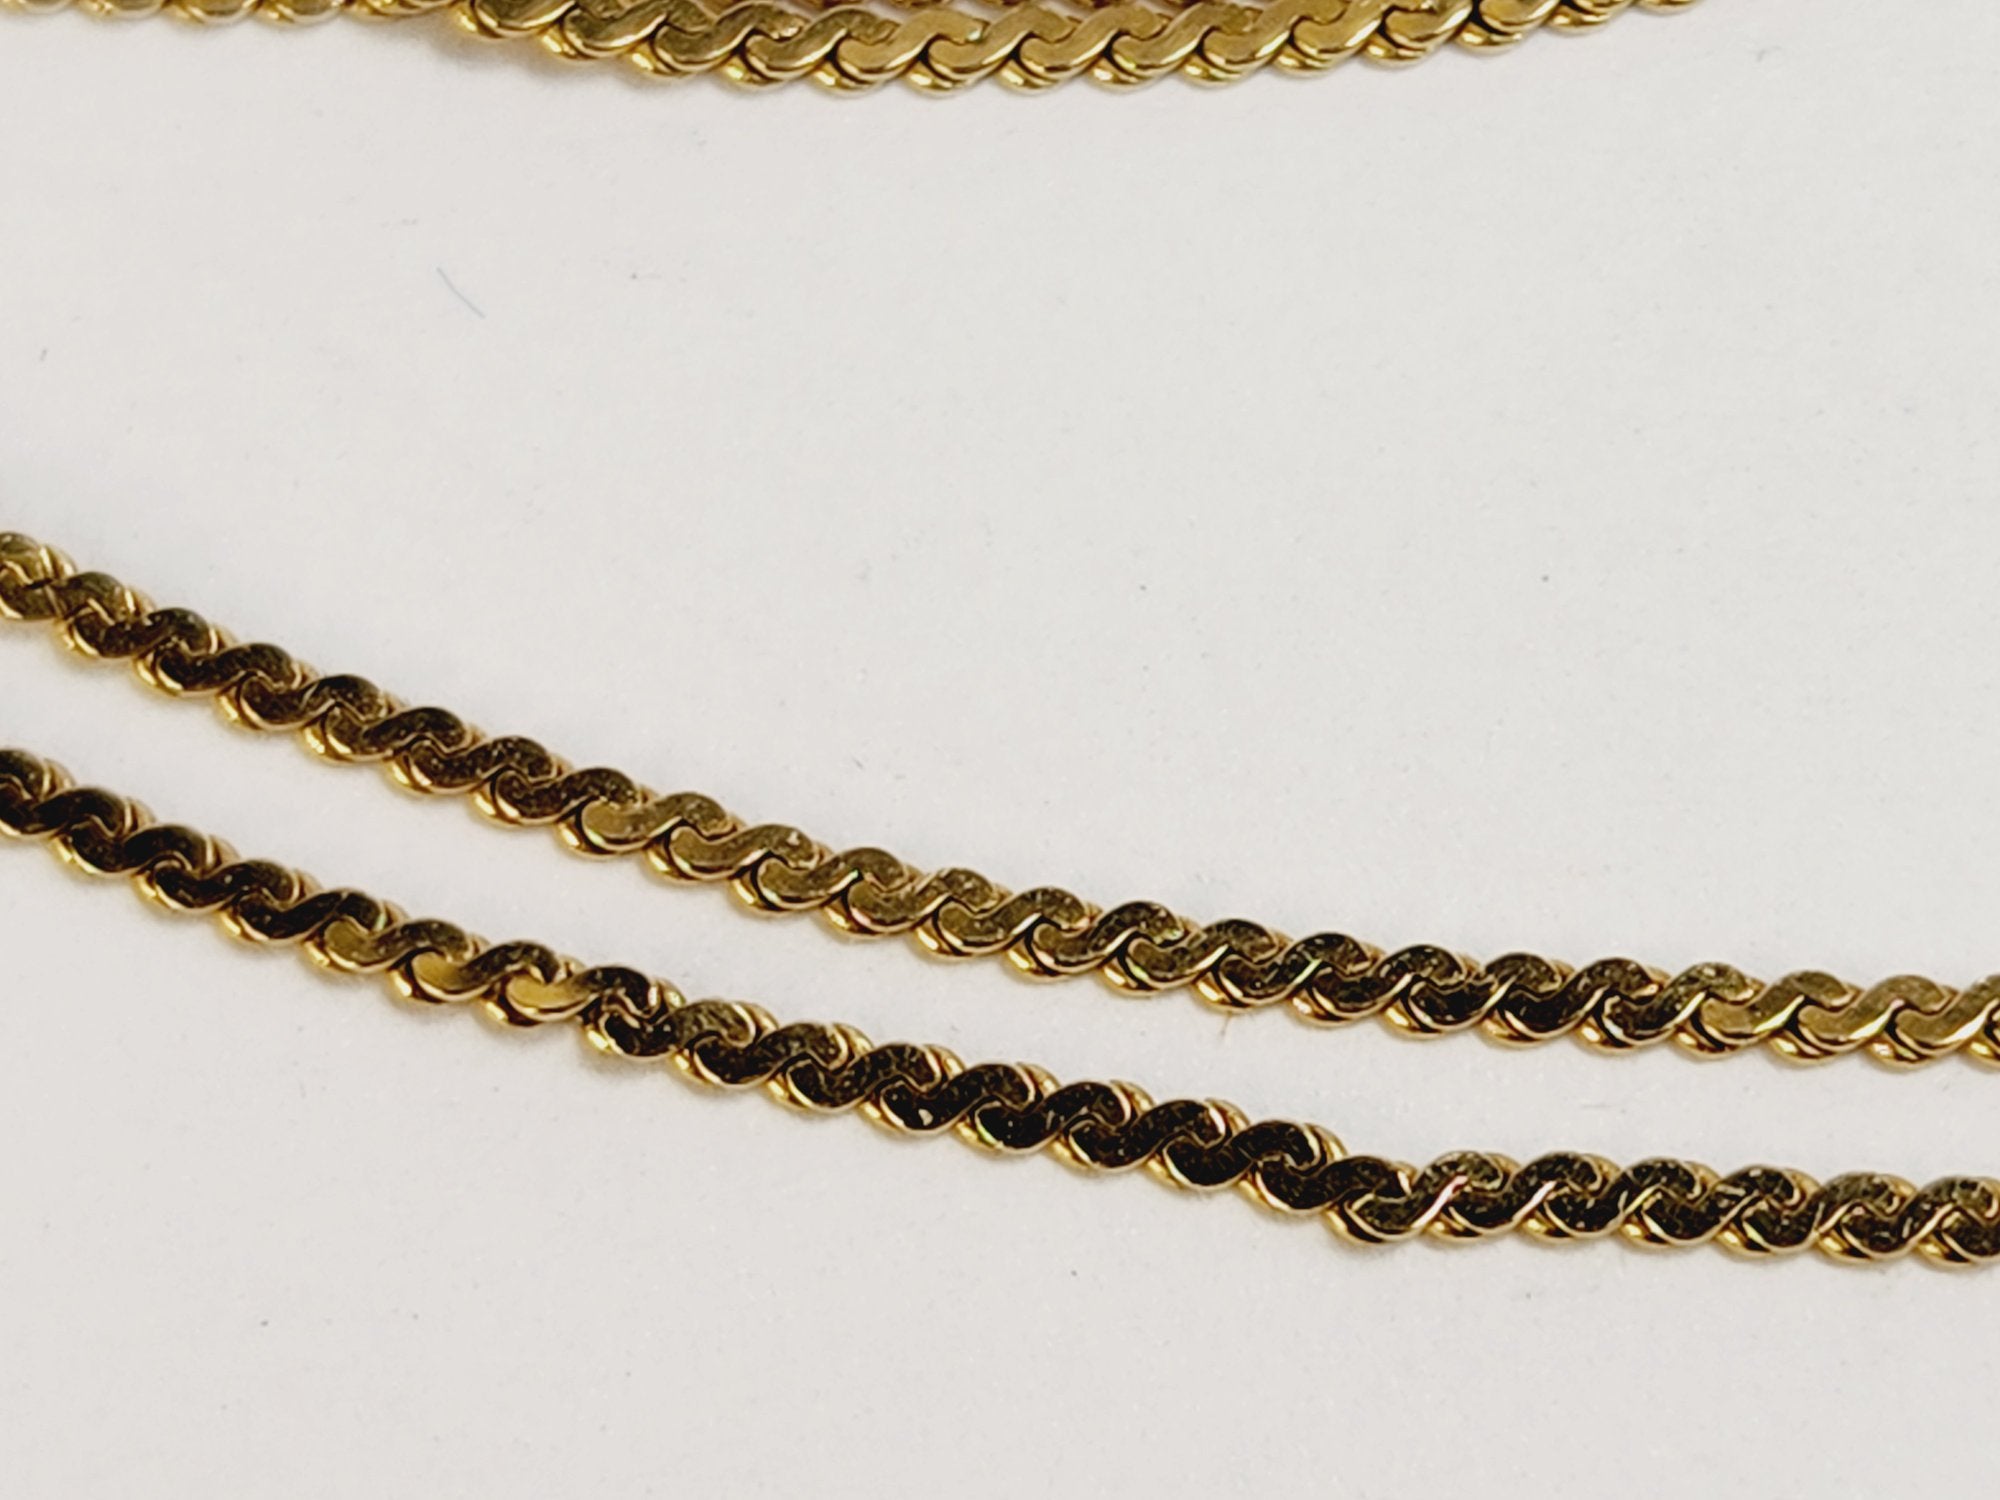 14k Italian Yellow Gold Flat Serpentine Link Chain Necklace